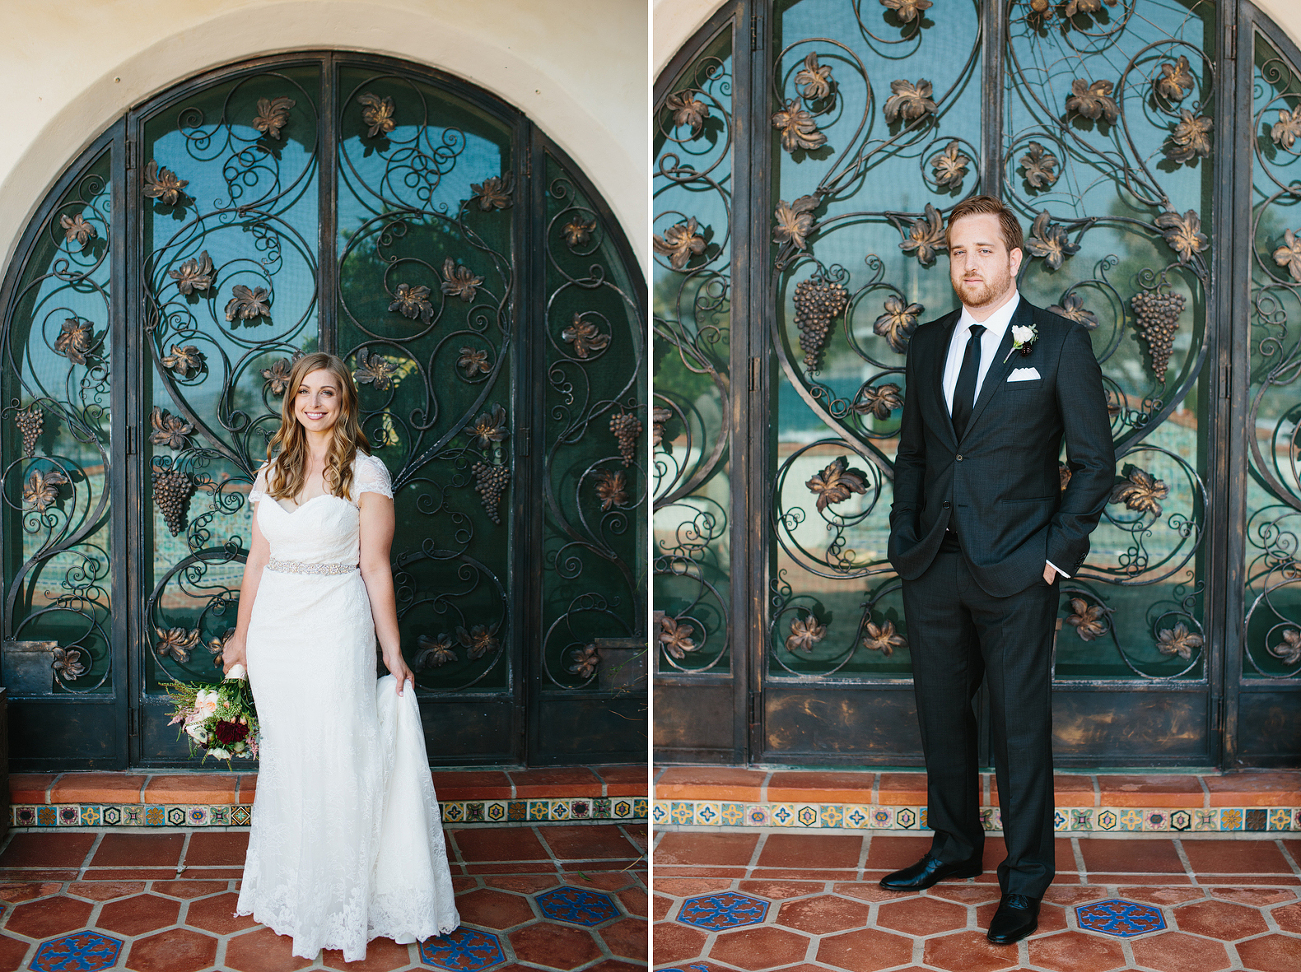 These are individual photos of Alix and Matt.